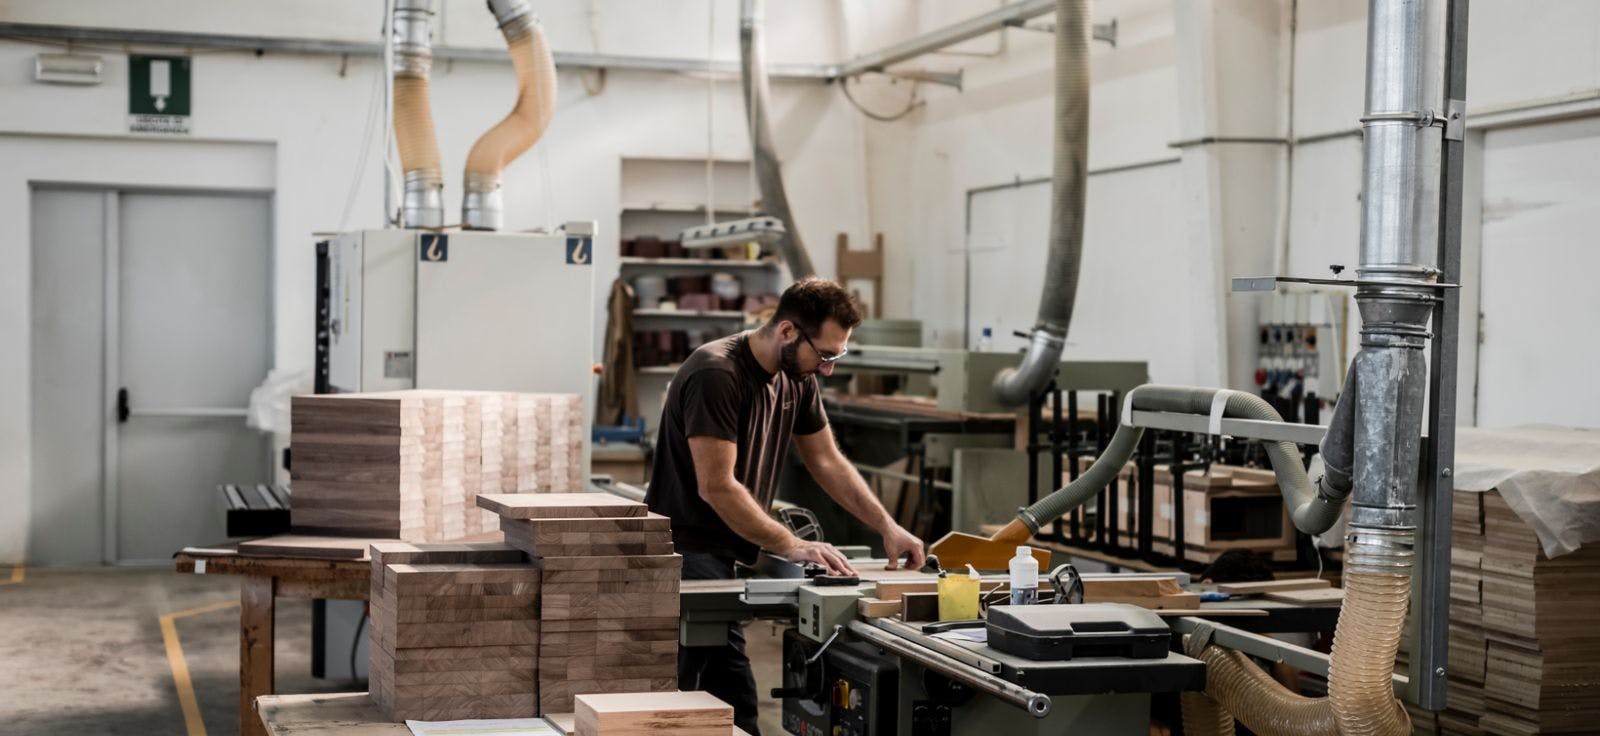 Sonus faber acquires long-term woodworking facility